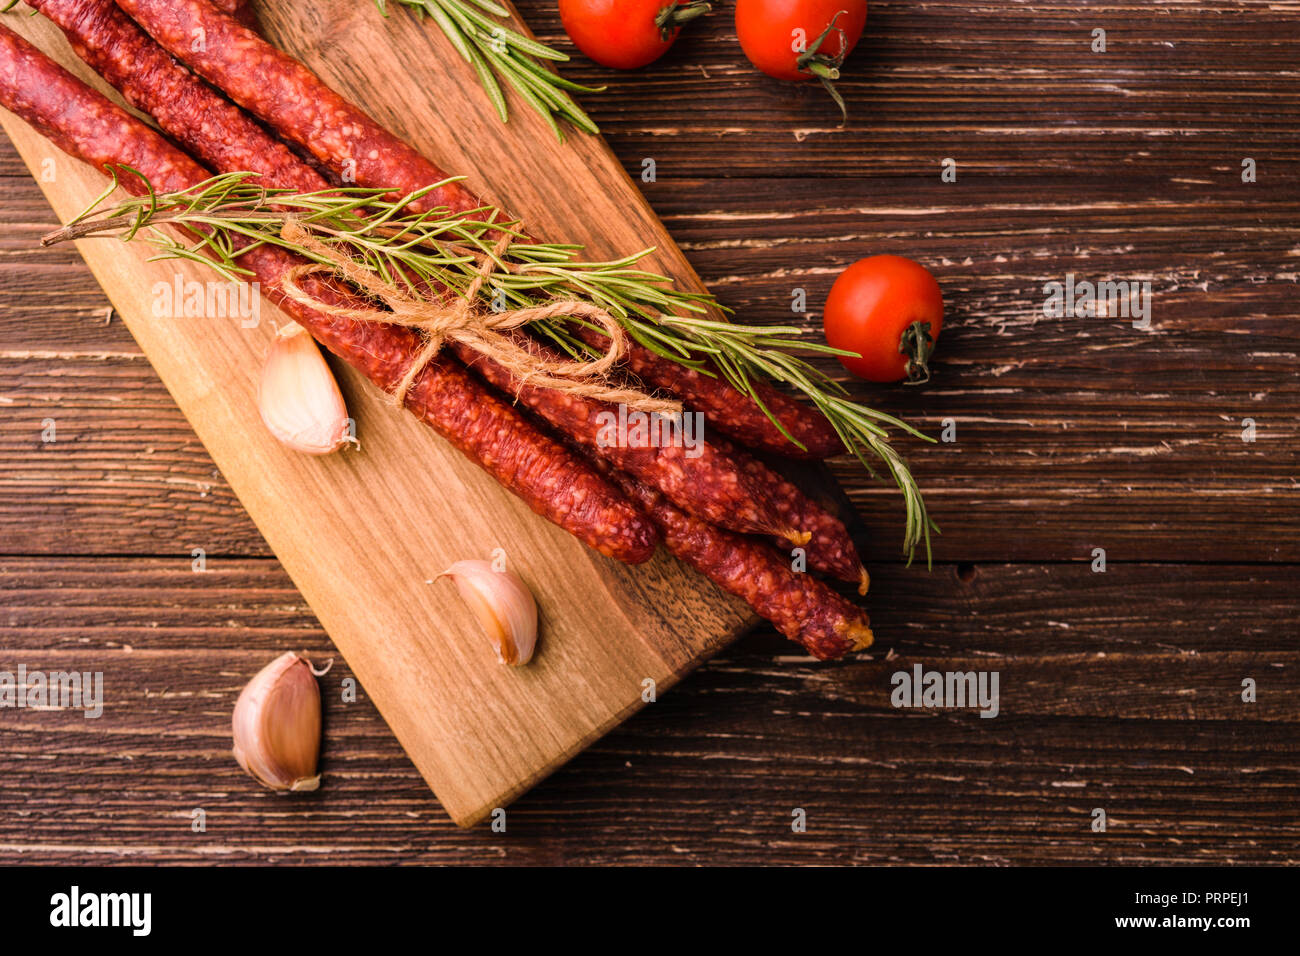 Kabanosy - smoked traditional polish pork sausages on wooden cutting board. With rosemary herb, garlic cloves and tomatoes. On rustic wooden table. To Stock Photo